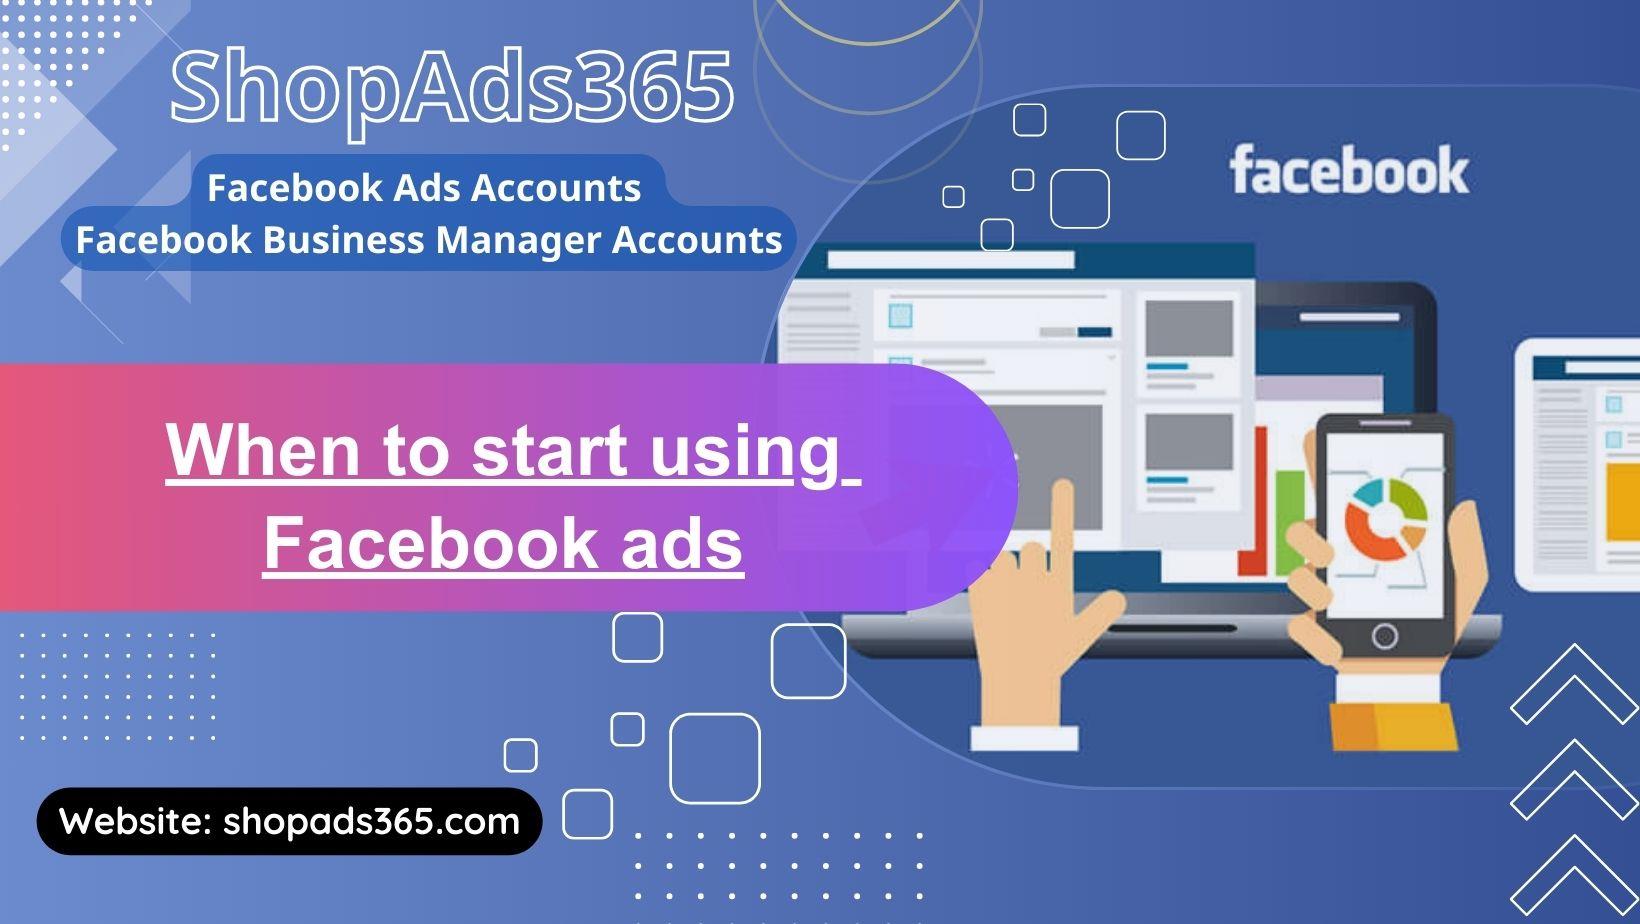 What Is the Best Time to Run Your Facebook Ads?